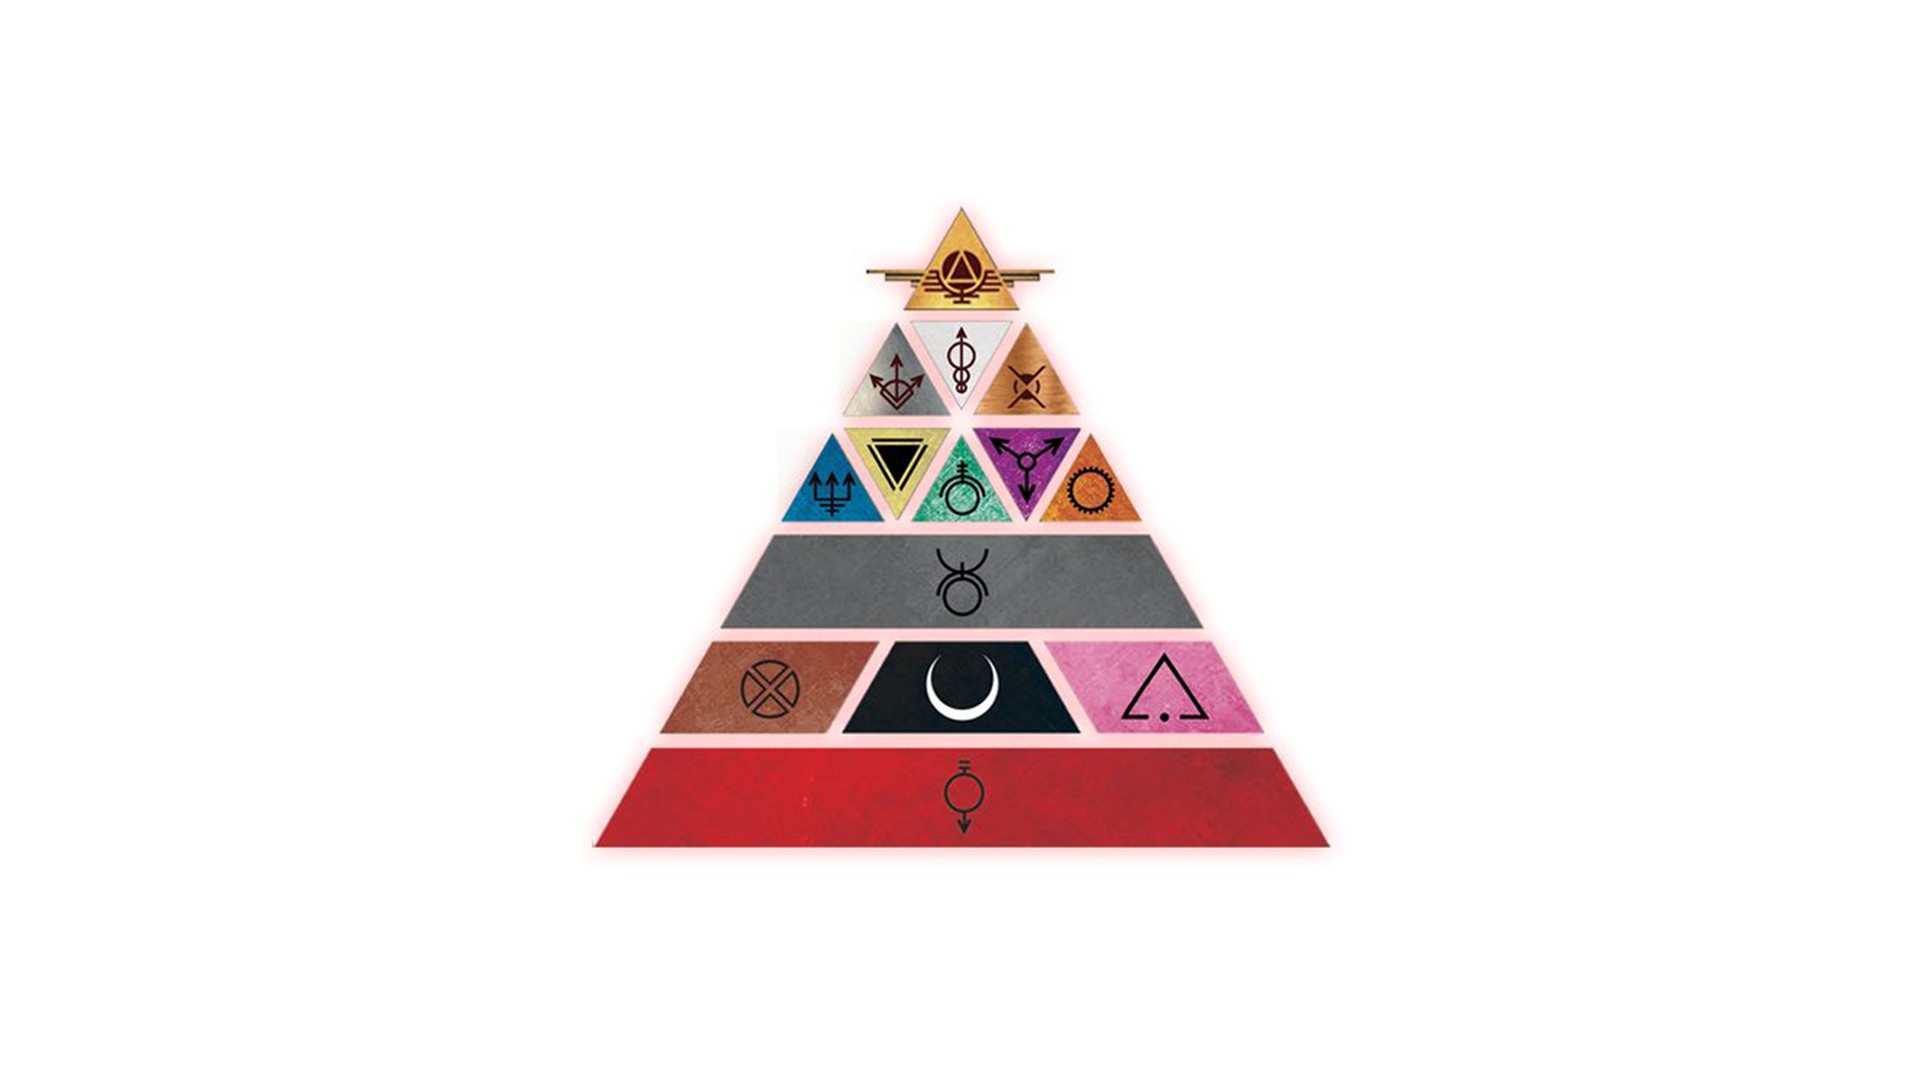 General 1920x1080 Red Rising artwork white background simple background pyramid triangle minimalism